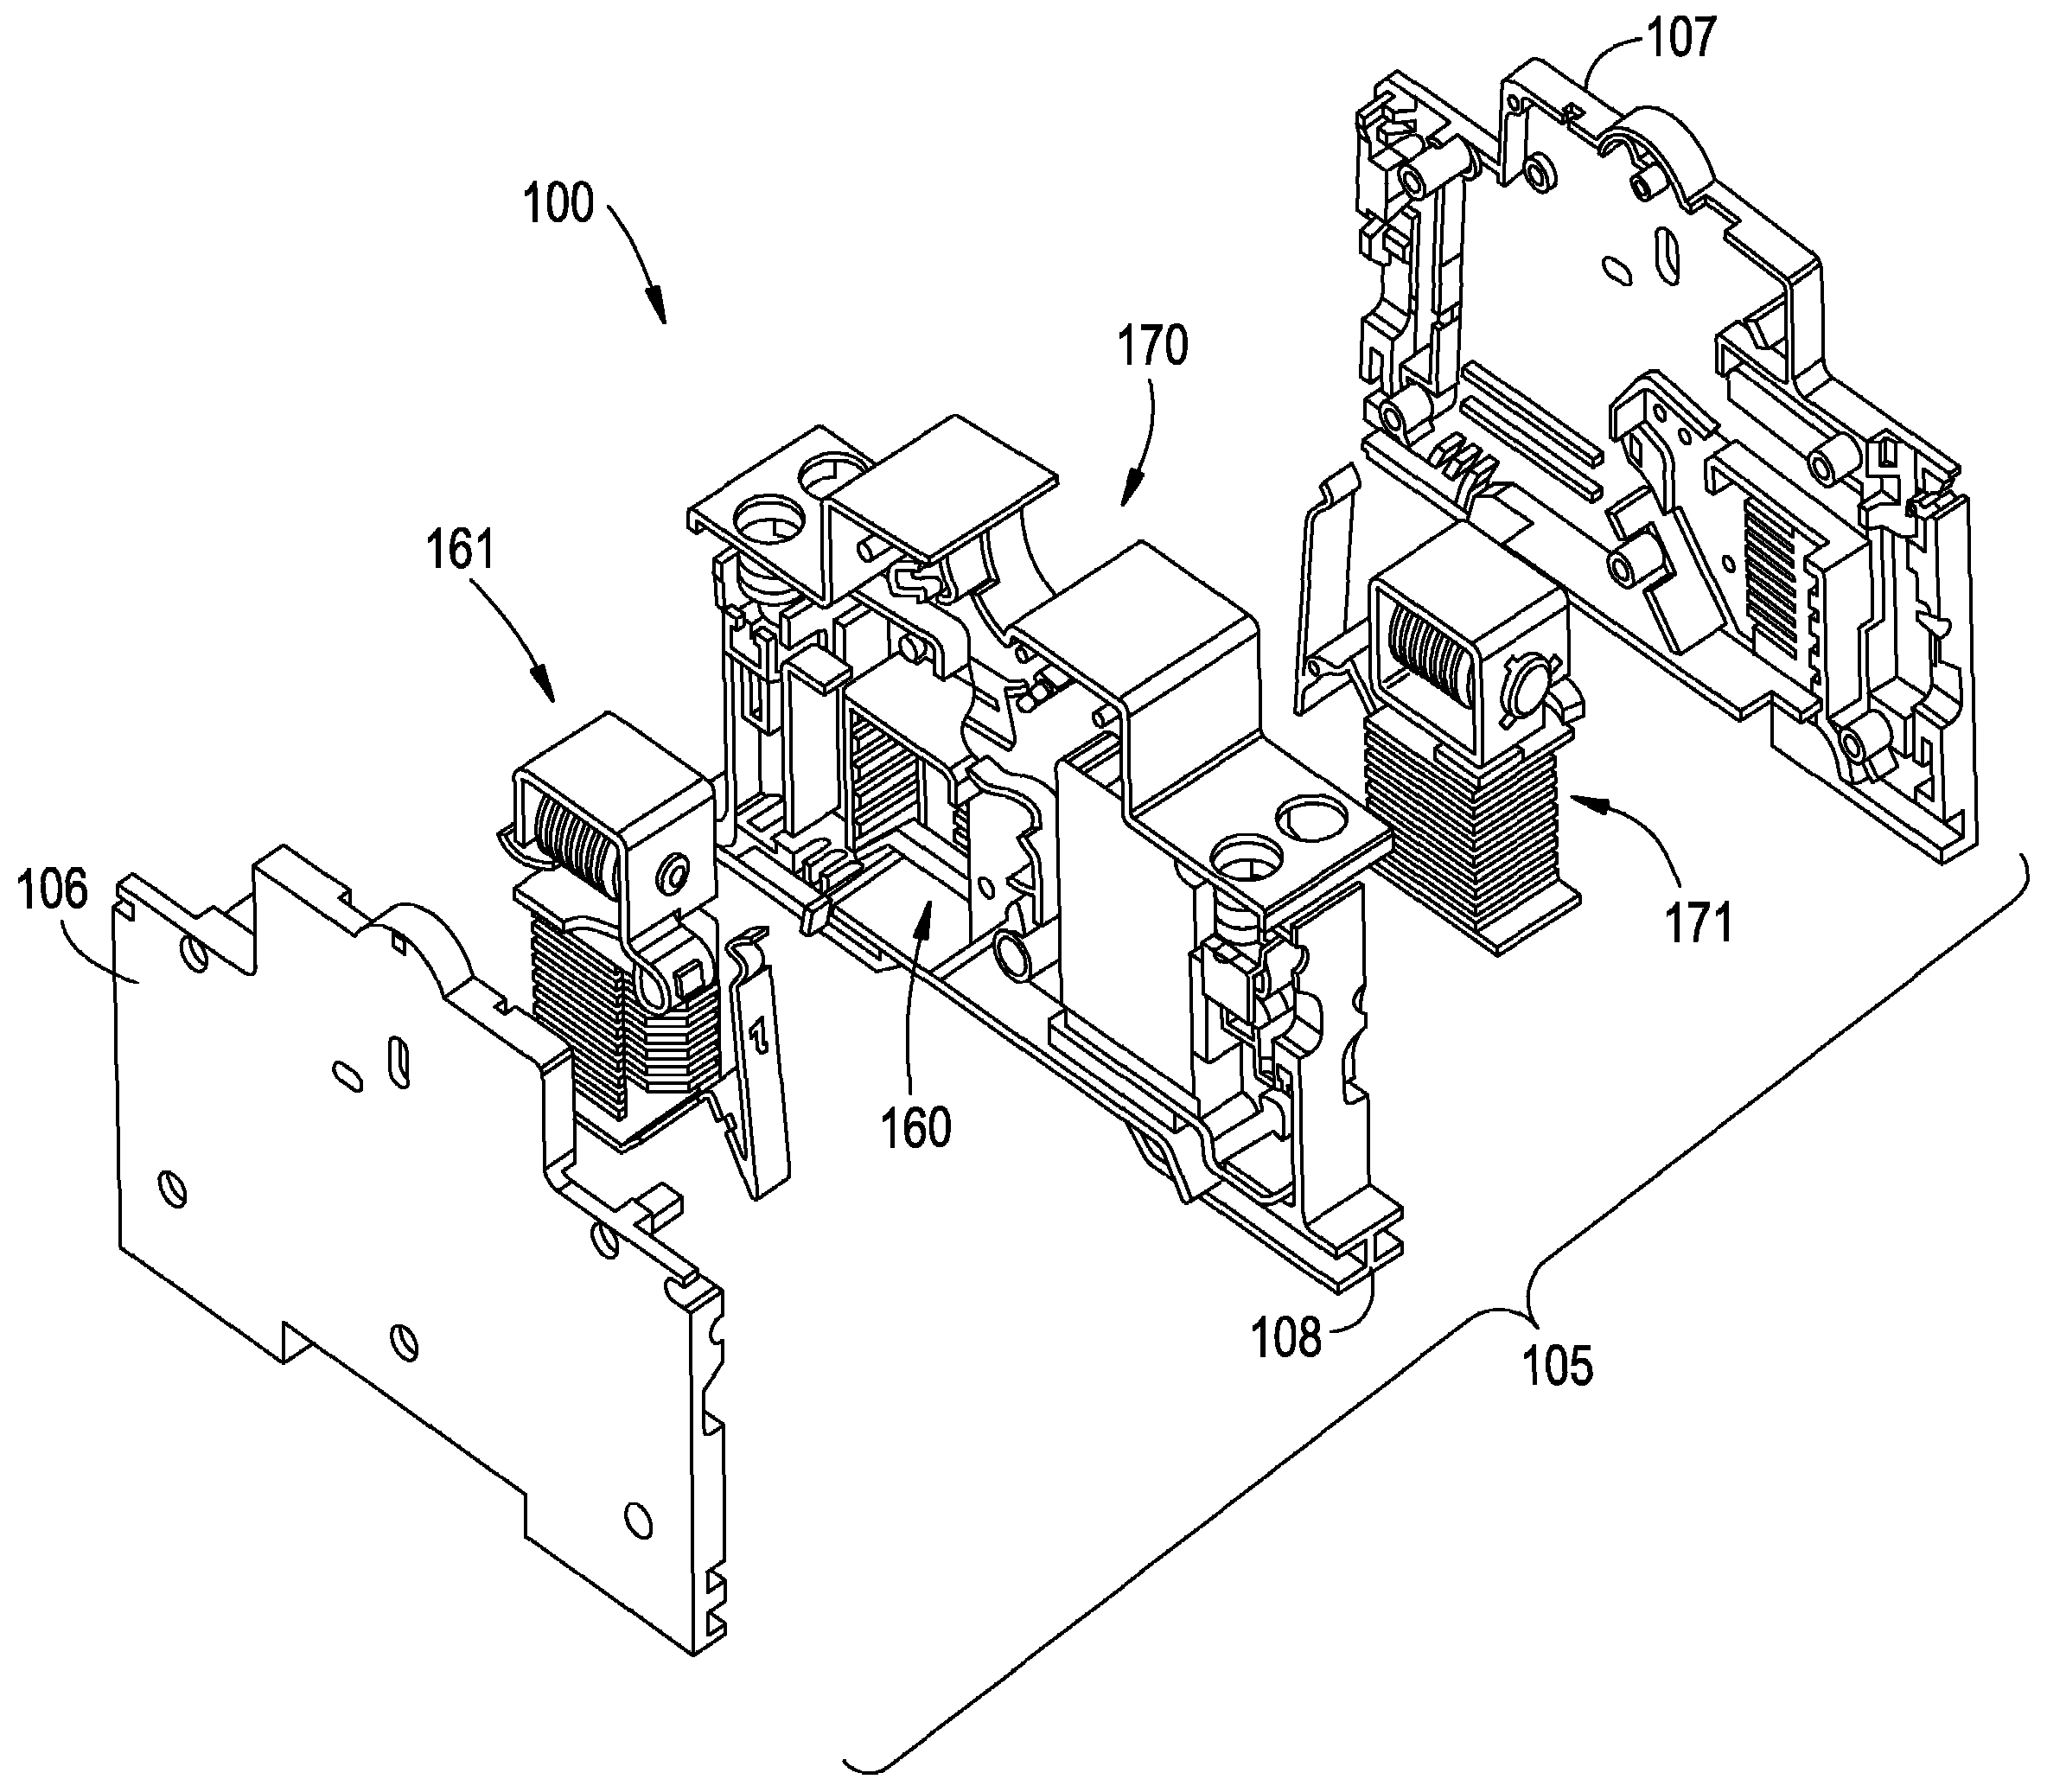 Space allocation for switching apparatus